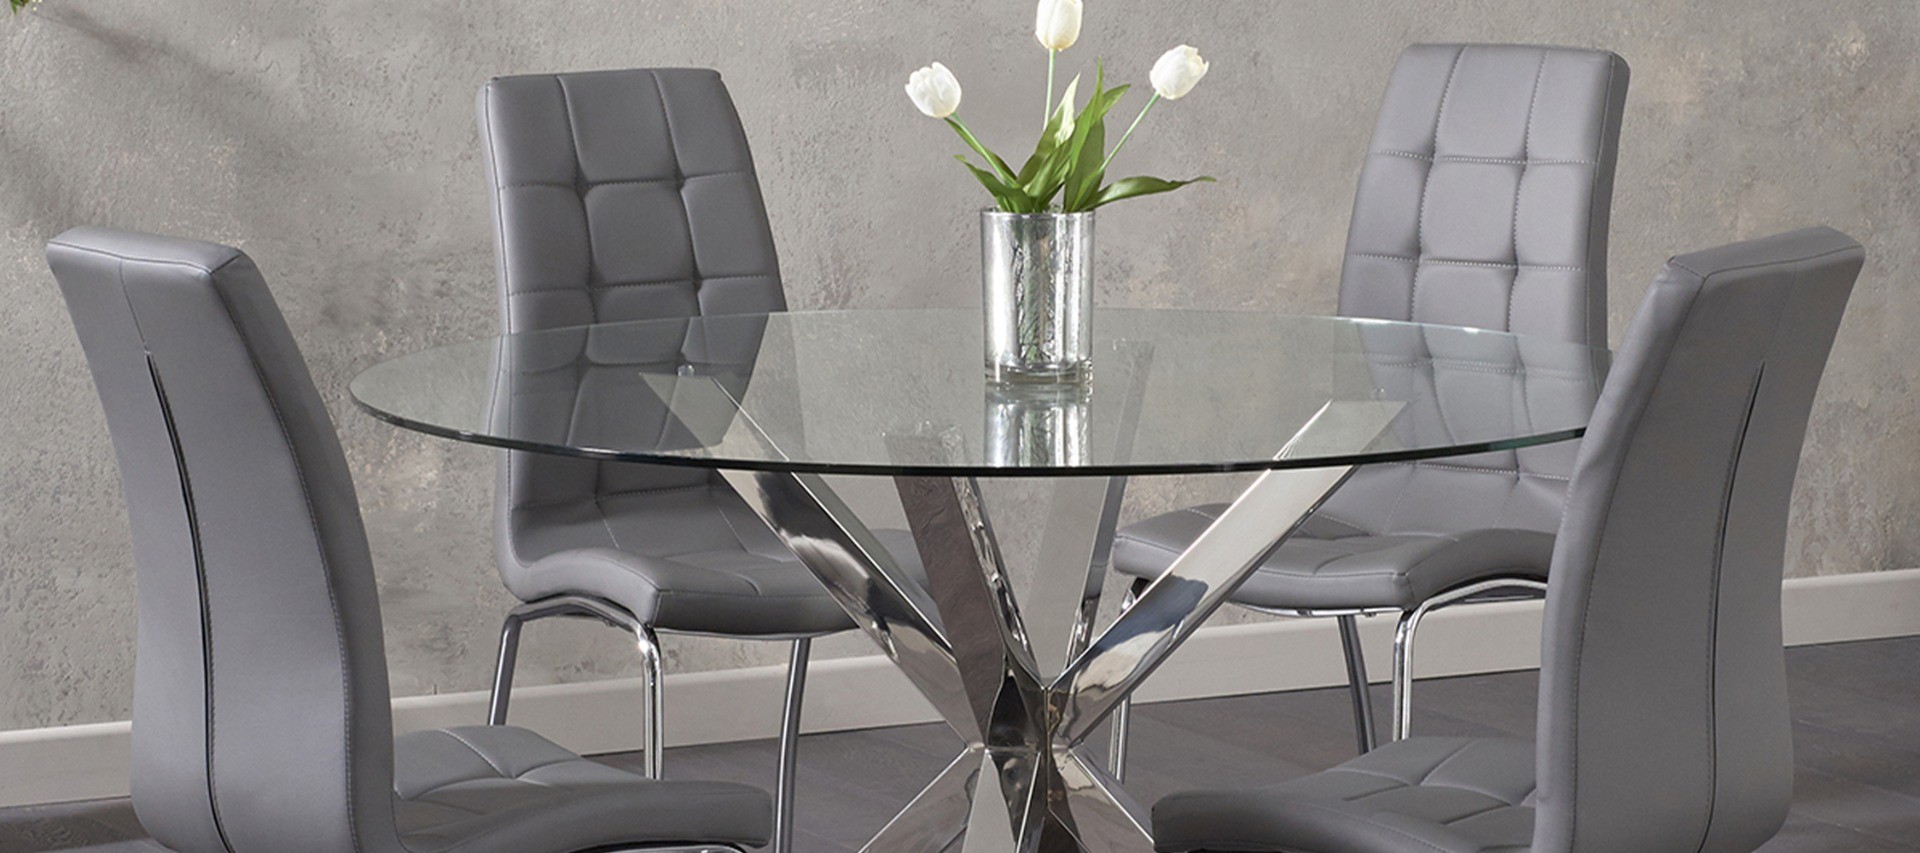 Photo 3 of Rodin 135cm round glass dining table